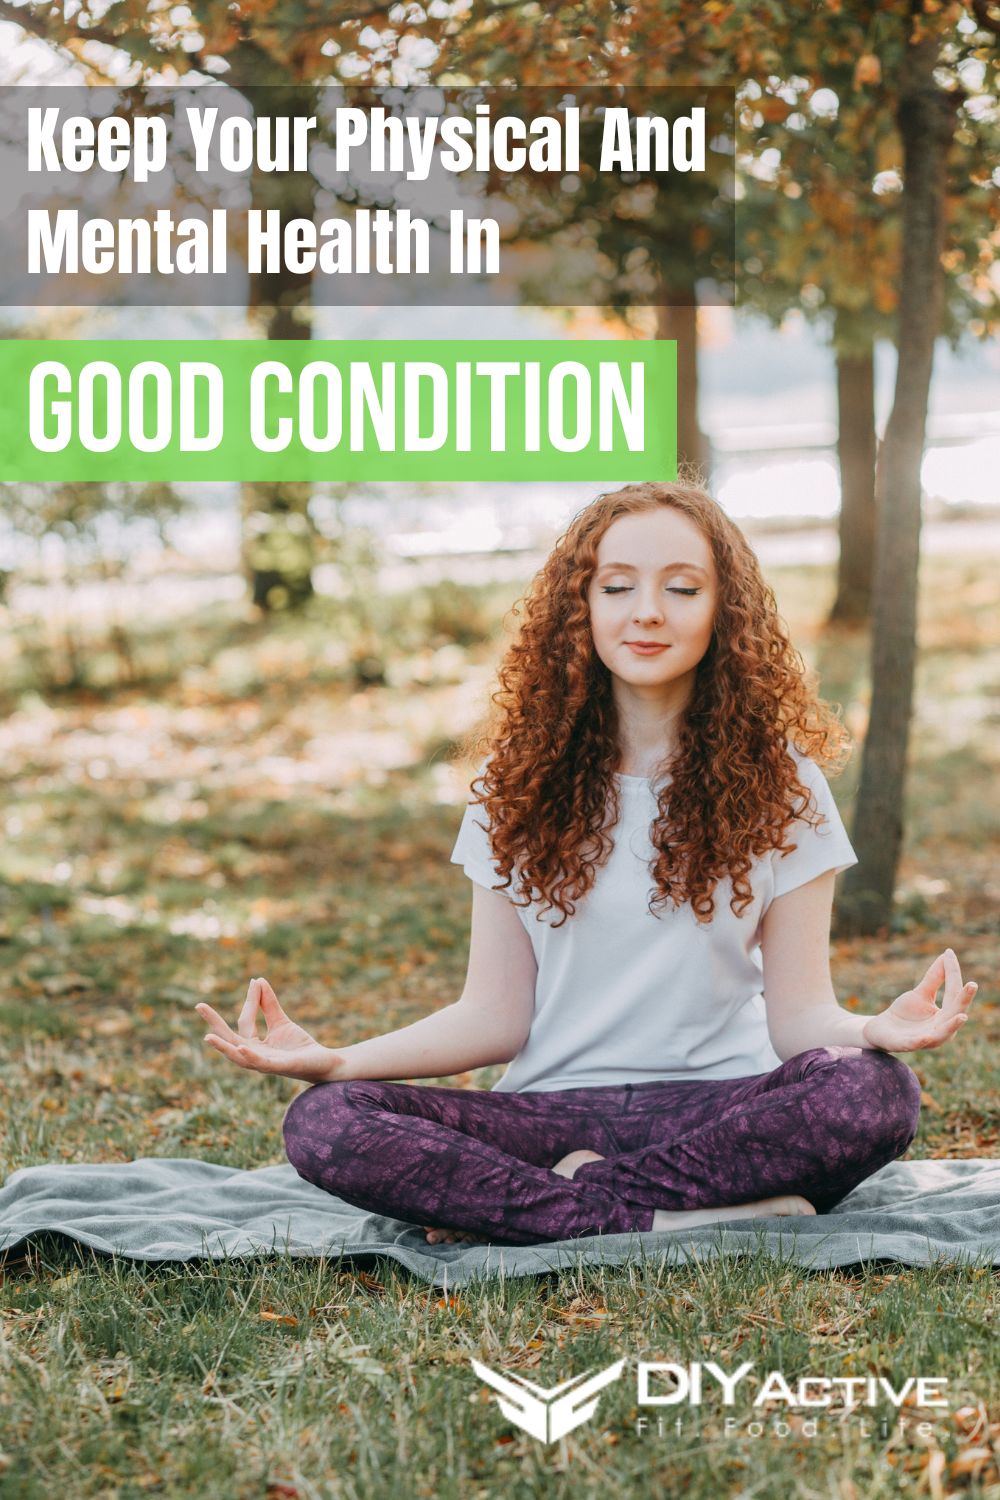 5 Ways To Keep Your Physical And Mental Health In Good Condition